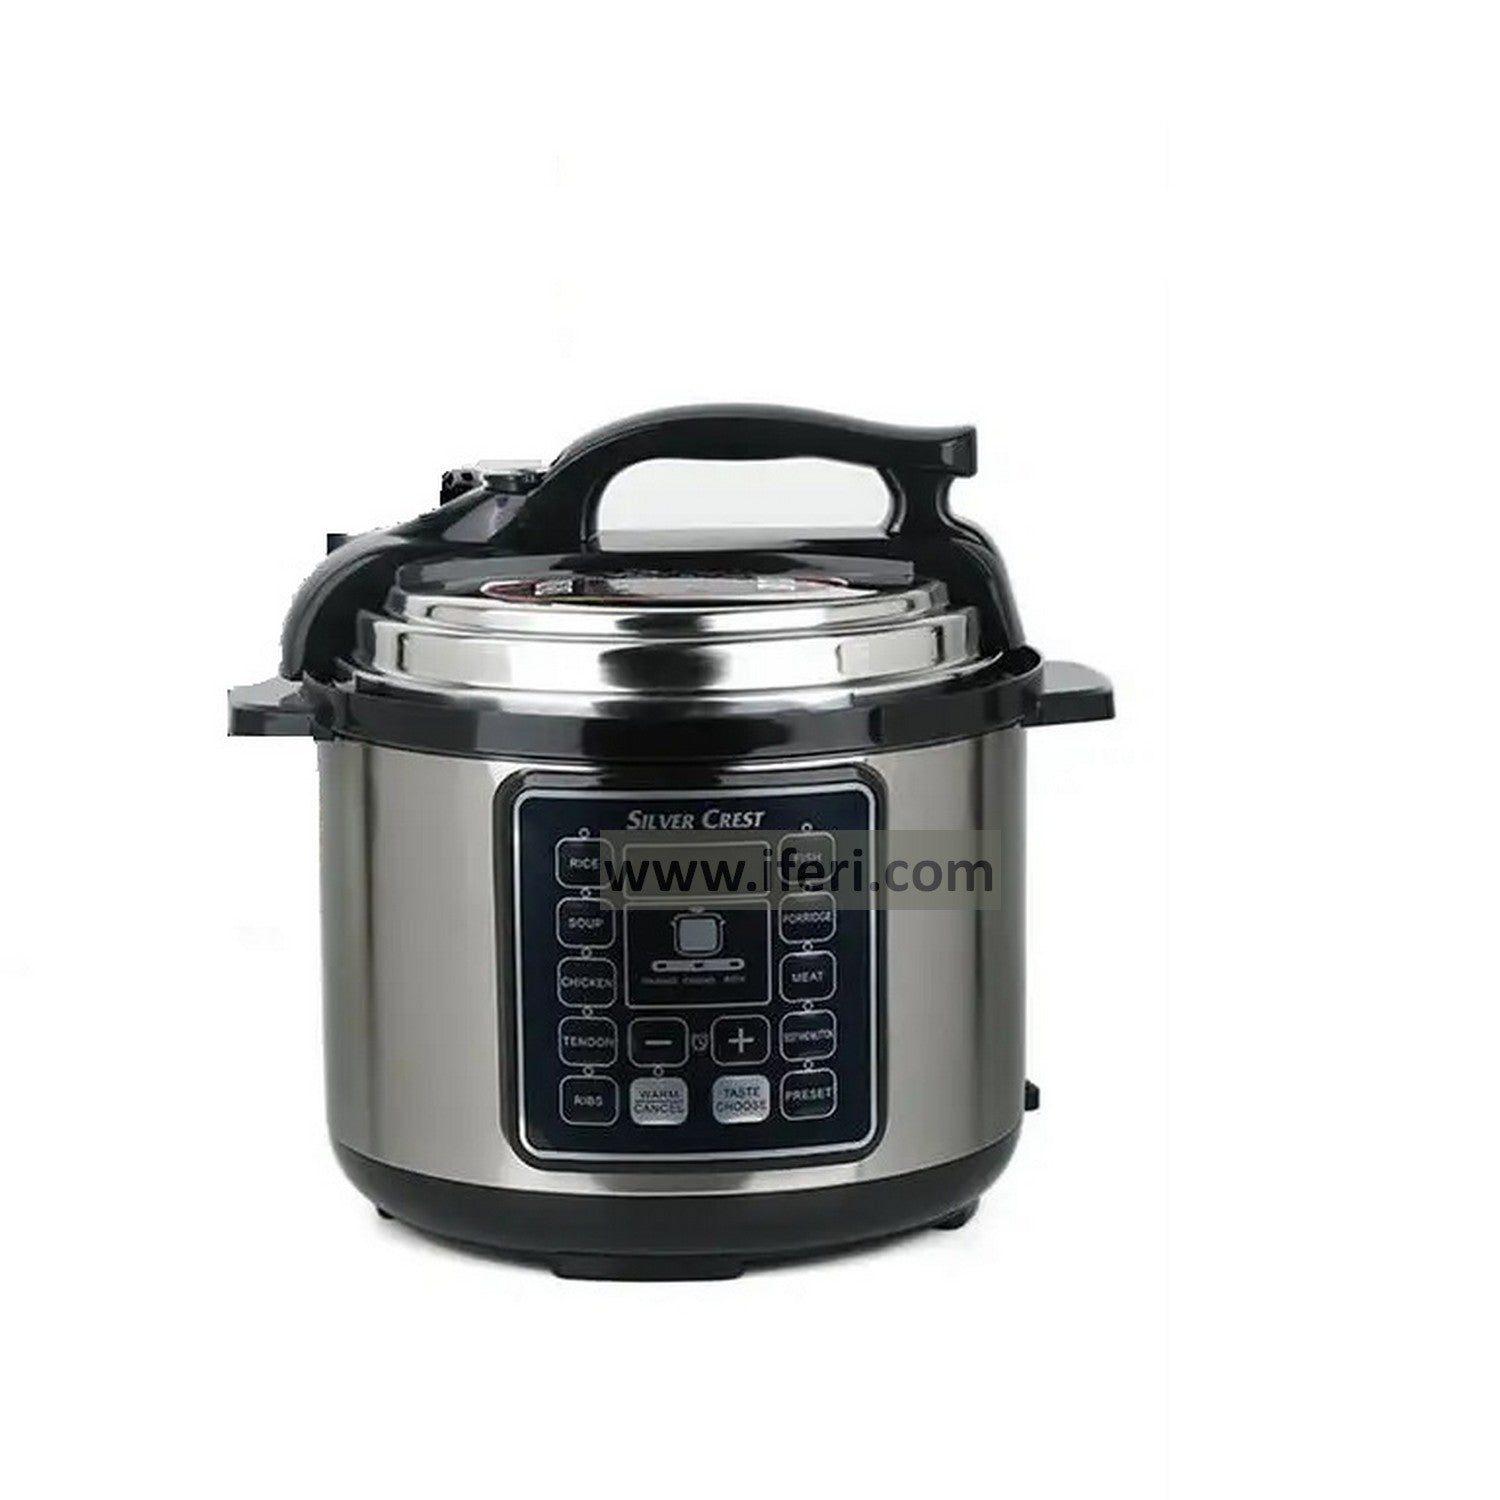 Silver Crest 10 in 1 Multifunctional Electric Pressure Cooker DS-377